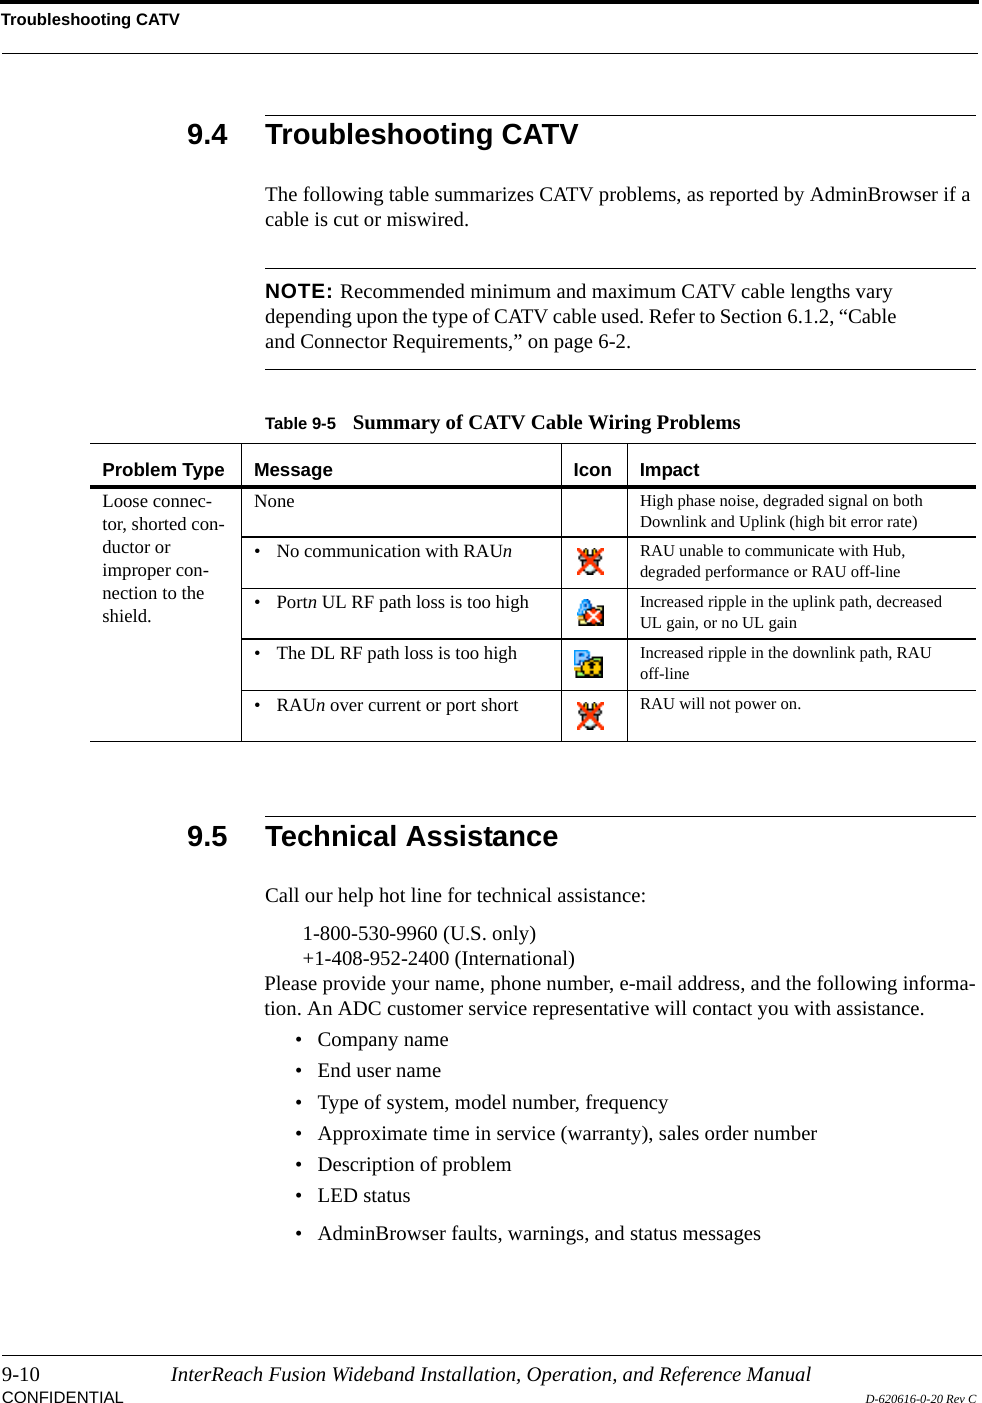 Troubleshooting CATV9-10 InterReach Fusion Wideband Installation, Operation, and Reference ManualCONFIDENTIAL D-620616-0-20 Rev C9.4 Troubleshooting CATVThe following table summarizes CATV problems, as reported by AdminBrowser if a cable is cut or miswired.NOTE: Recommended minimum and maximum CATV cable lengths vary depending upon the type of CATV cable used. Refer to Section 6.1.2, “Cable and Connector Requirements,” on page 6-2.9.5 Technical AssistanceCall our help hot line for technical assistance:1-800-530-9960 (U.S. only)+1-408-952-2400 (International)Please provide your name, phone number, e-mail address, and the following informa-tion. An ADC customer service representative will contact you with assistance.• Company name• End user name• Type of system, model number, frequency• Approximate time in service (warranty), sales order number• Description of problem• LED status• AdminBrowser faults, warnings, and status messagesTable 9-5 Summary of CATV Cable Wiring ProblemsProblem Type Message Icon ImpactLoose connec-tor, shorted con-ductor or improper con-nection to the shield.None High phase noise, degraded signal on both Downlink and Uplink (high bit error rate)• No communication with RAUn  RAU unable to communicate with Hub, degraded performance or RAU off-line• Portn UL RF path loss is too high Increased ripple in the uplink path, decreased UL gain, or no UL gain• The DL RF path loss is too high Increased ripple in the downlink path, RAU off-line•RAUn over current or port short RAU will not power on.